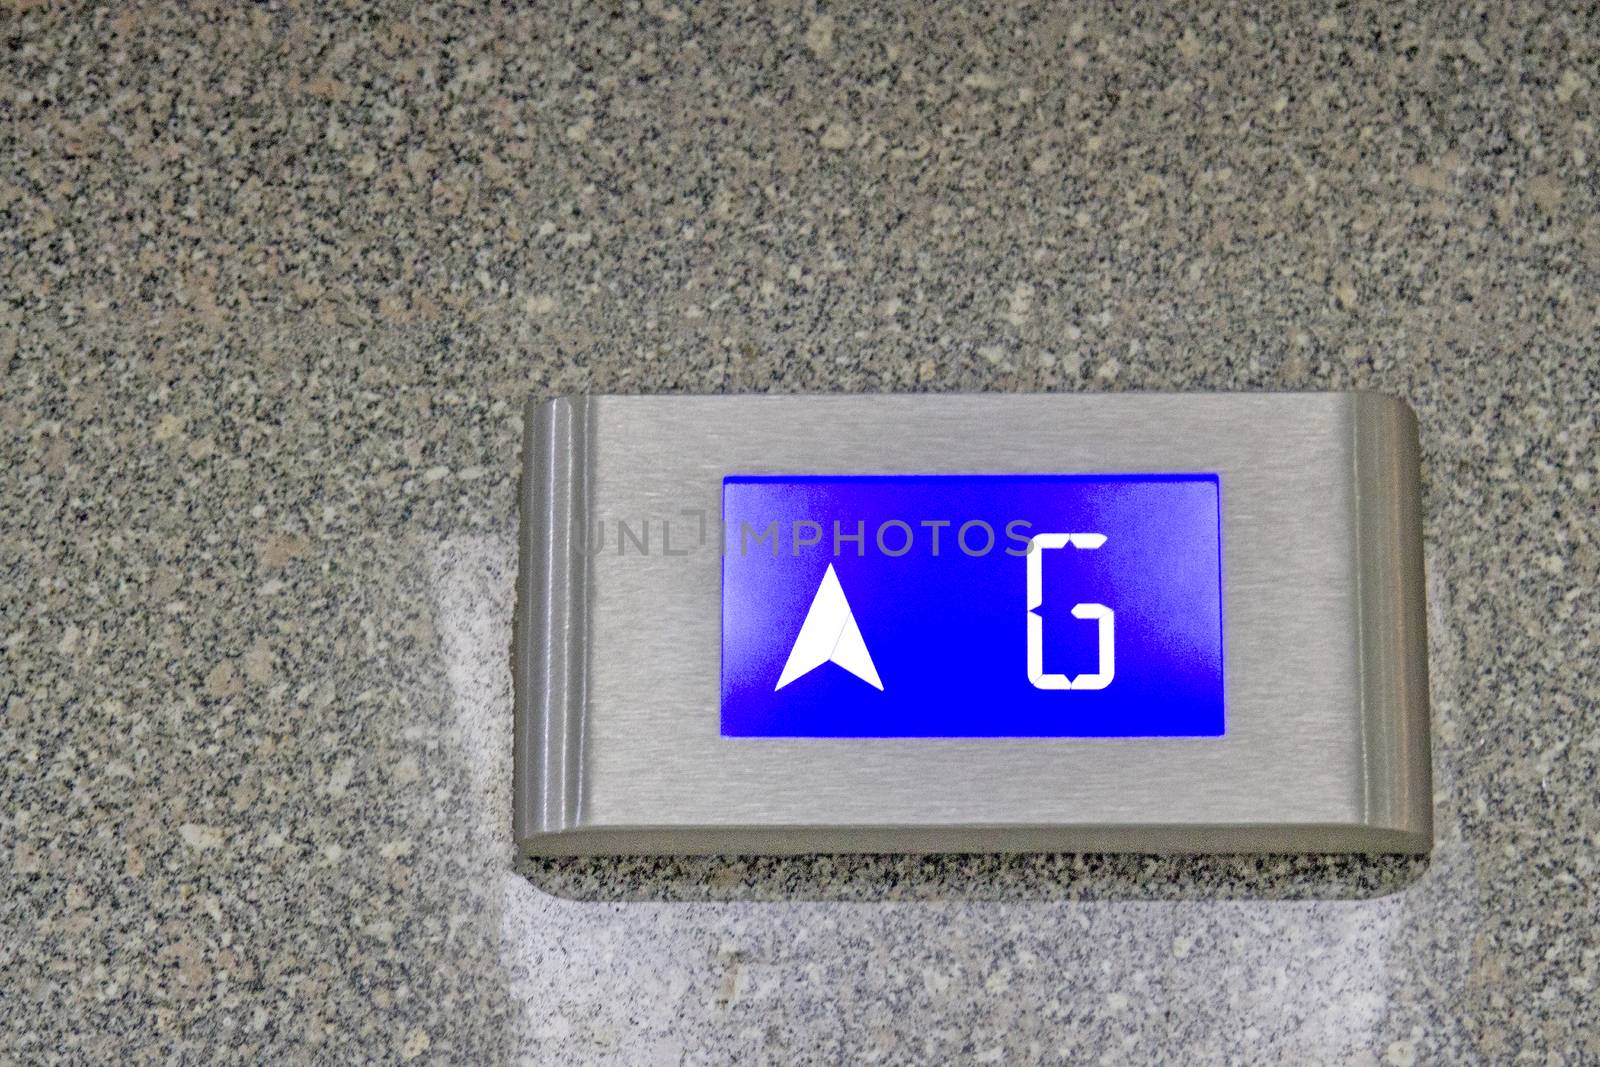 The number tells the G floor of the elevator in under ligthing.